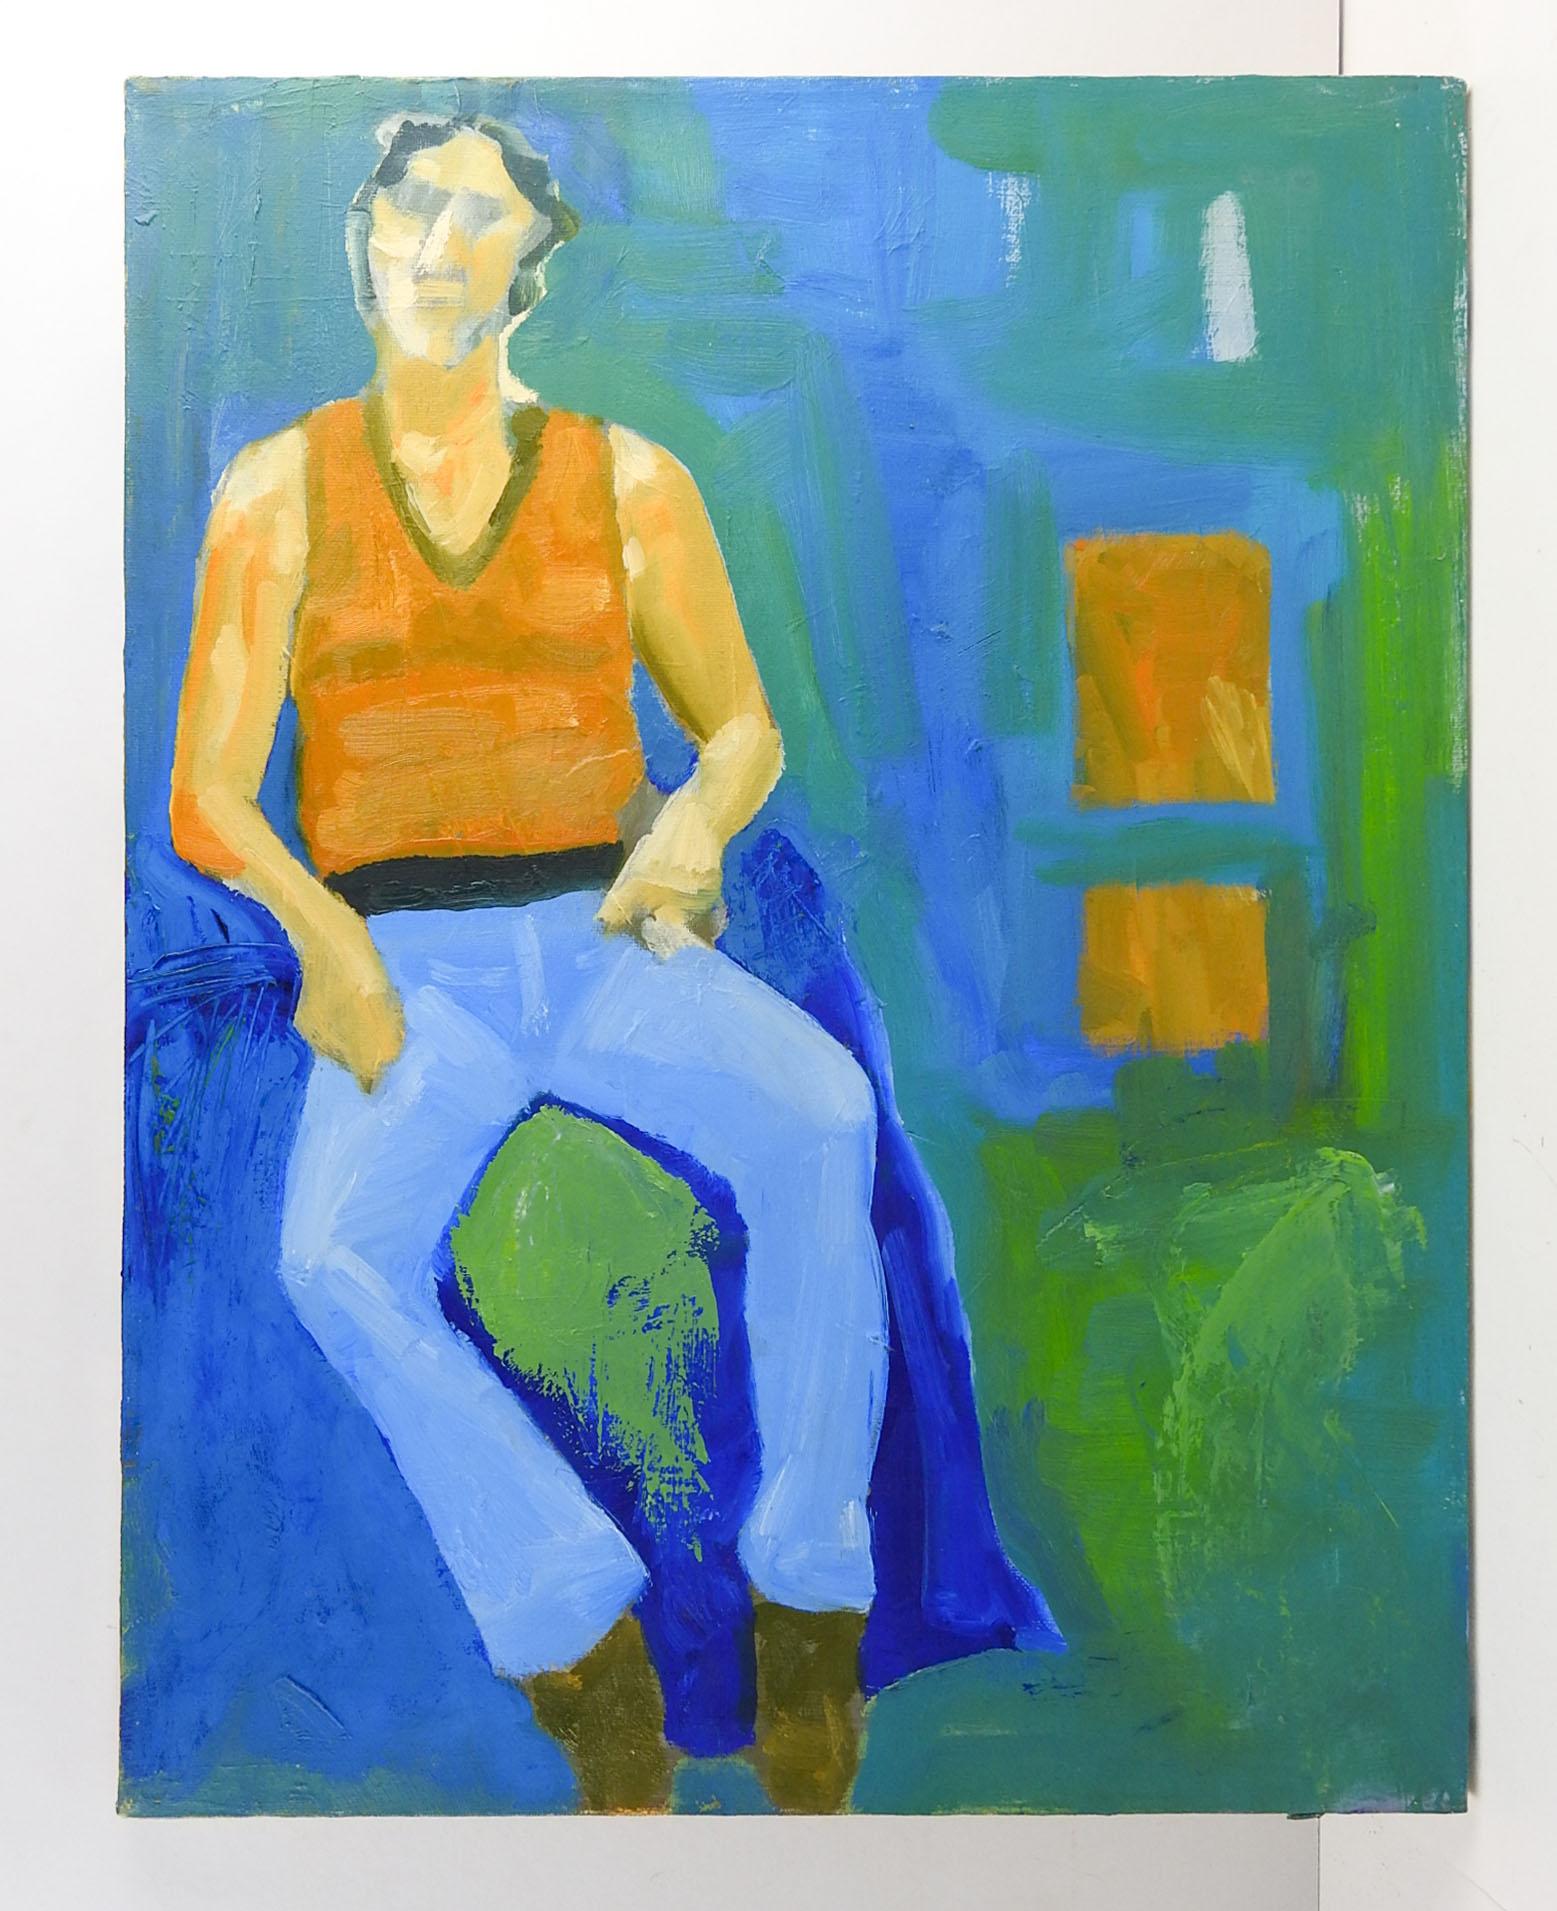 Oil on canvas modernist portrait of a man sitting by Bruce W. Clements (1936-2008) Mass. Unsigned from the artists estate. Unframed.